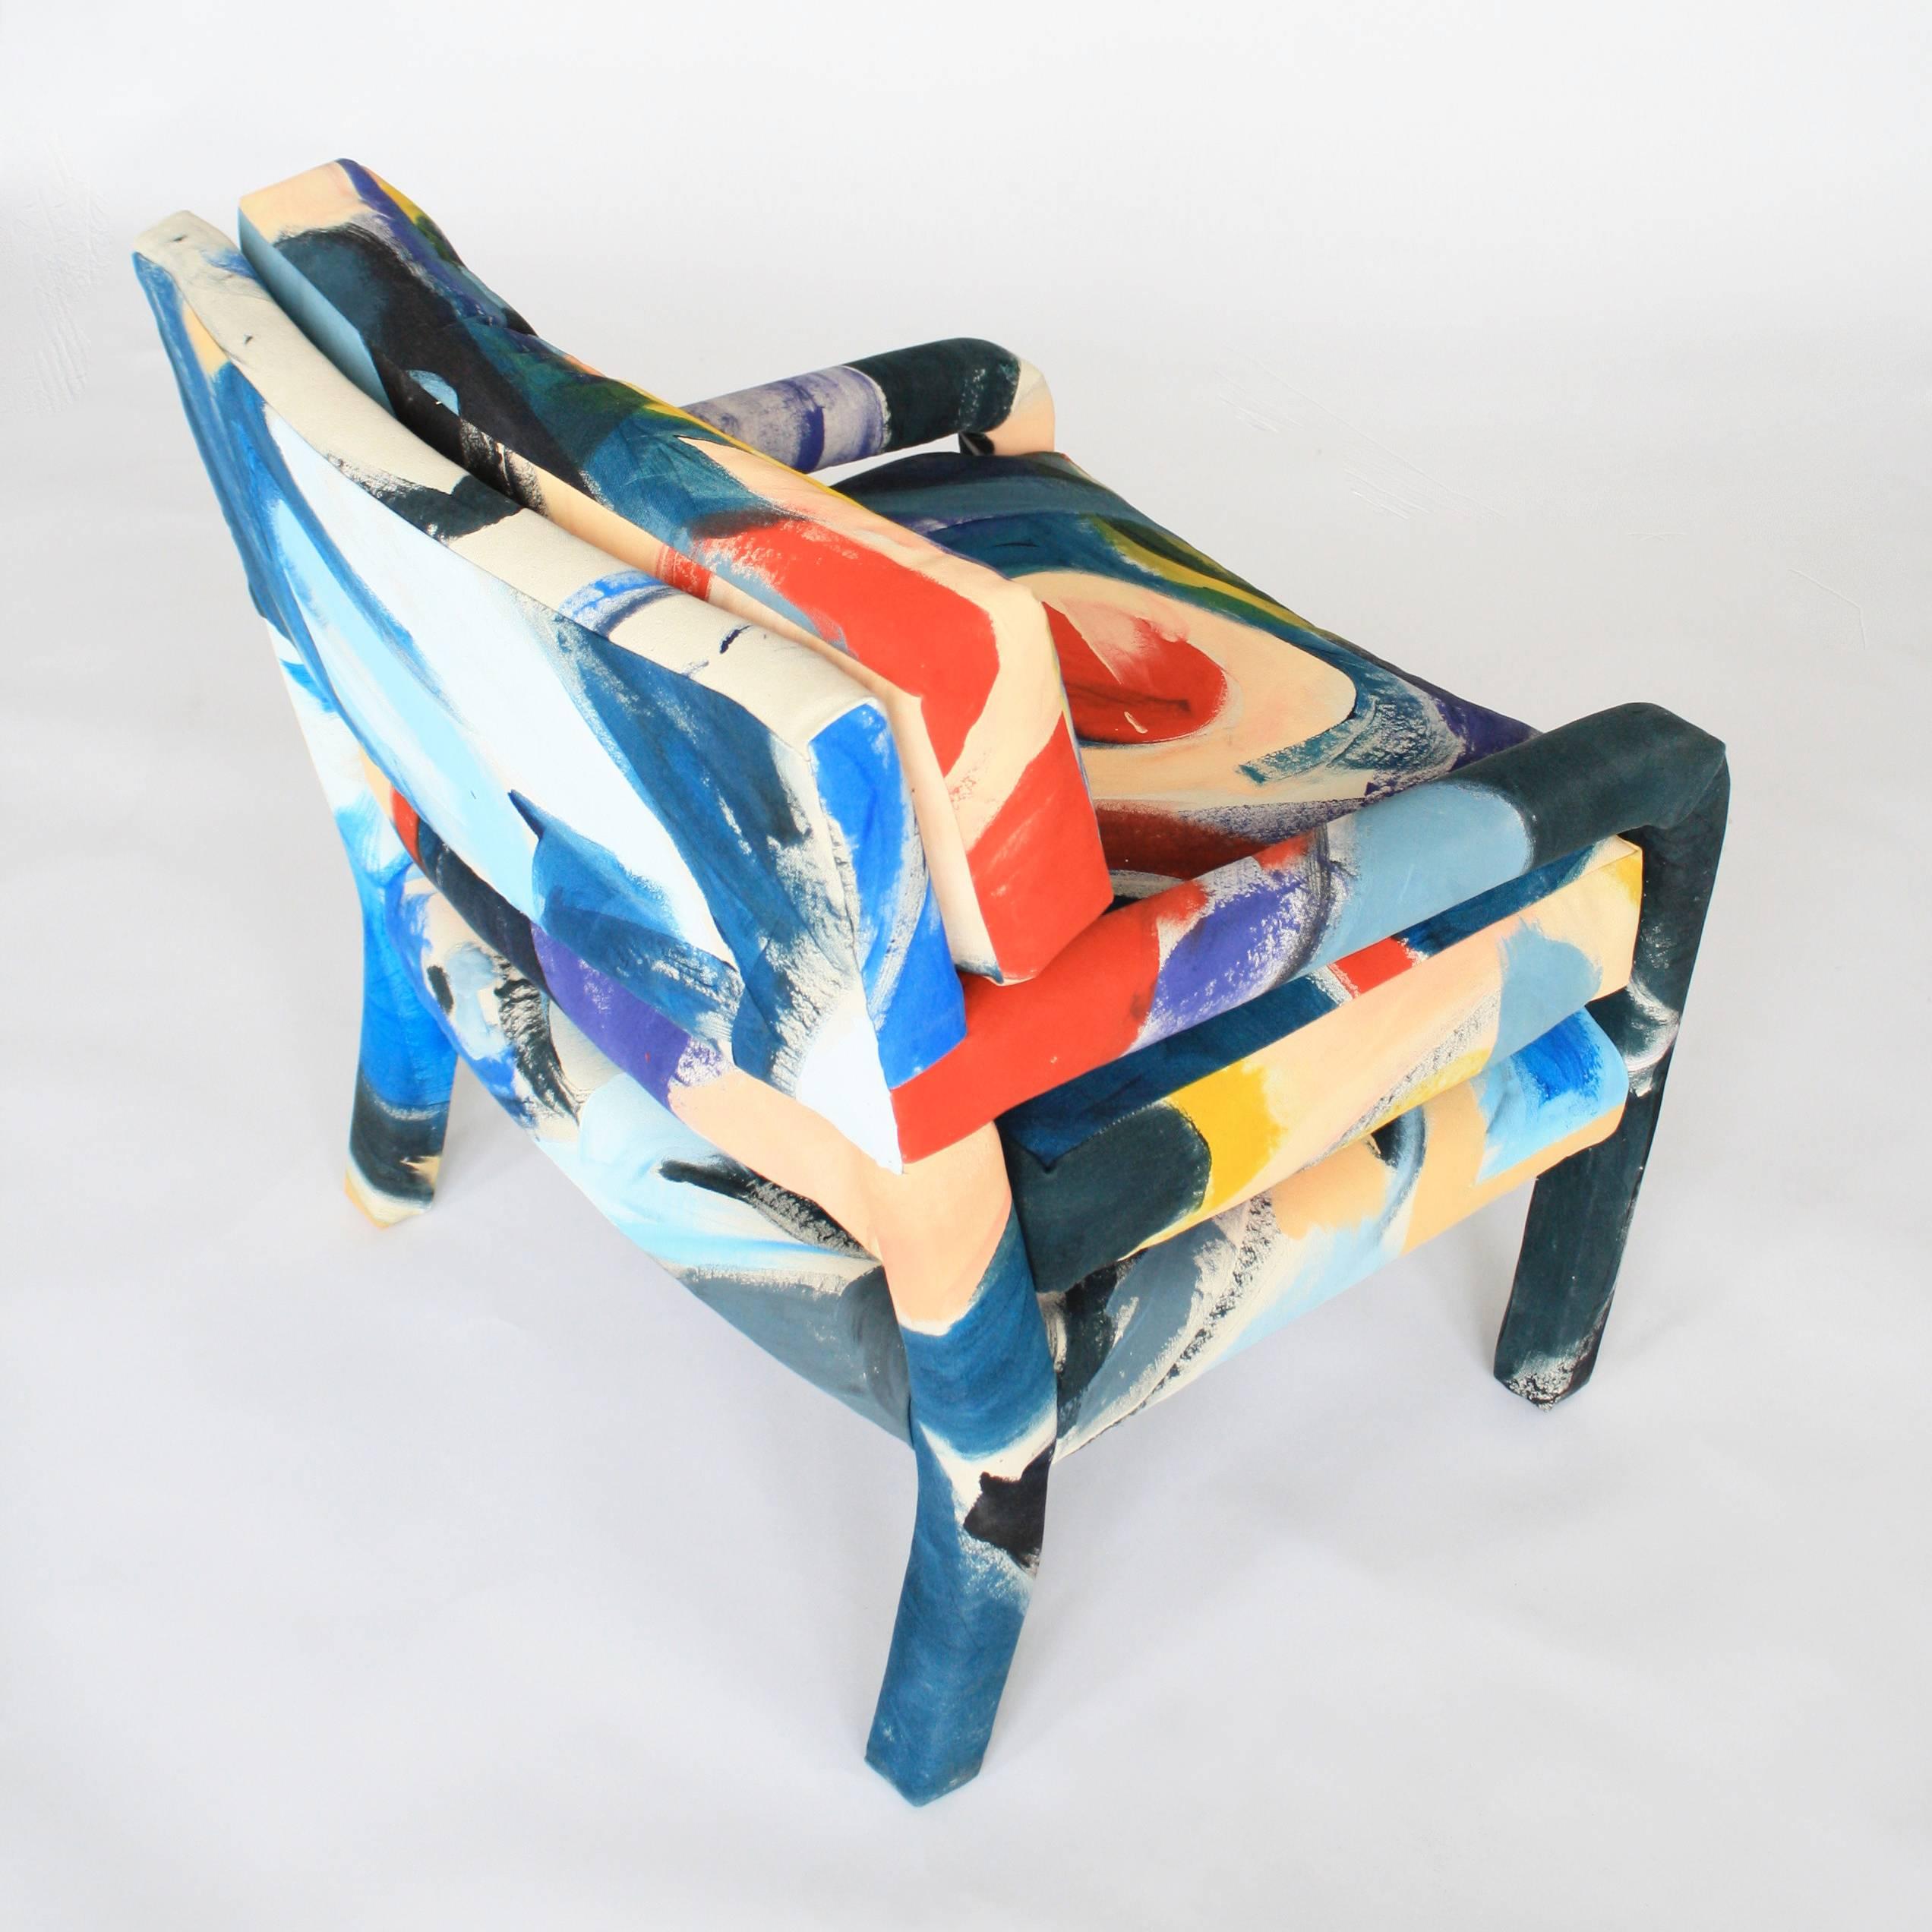 For Fort Makers, Naomi Clark paints vibrant abstract compositions on fabrics that are then made into useable objects. This 1970s vintage chair in the style of Milo Baughman was reupholstered in Clark's colorful canvas composition. It functions as a